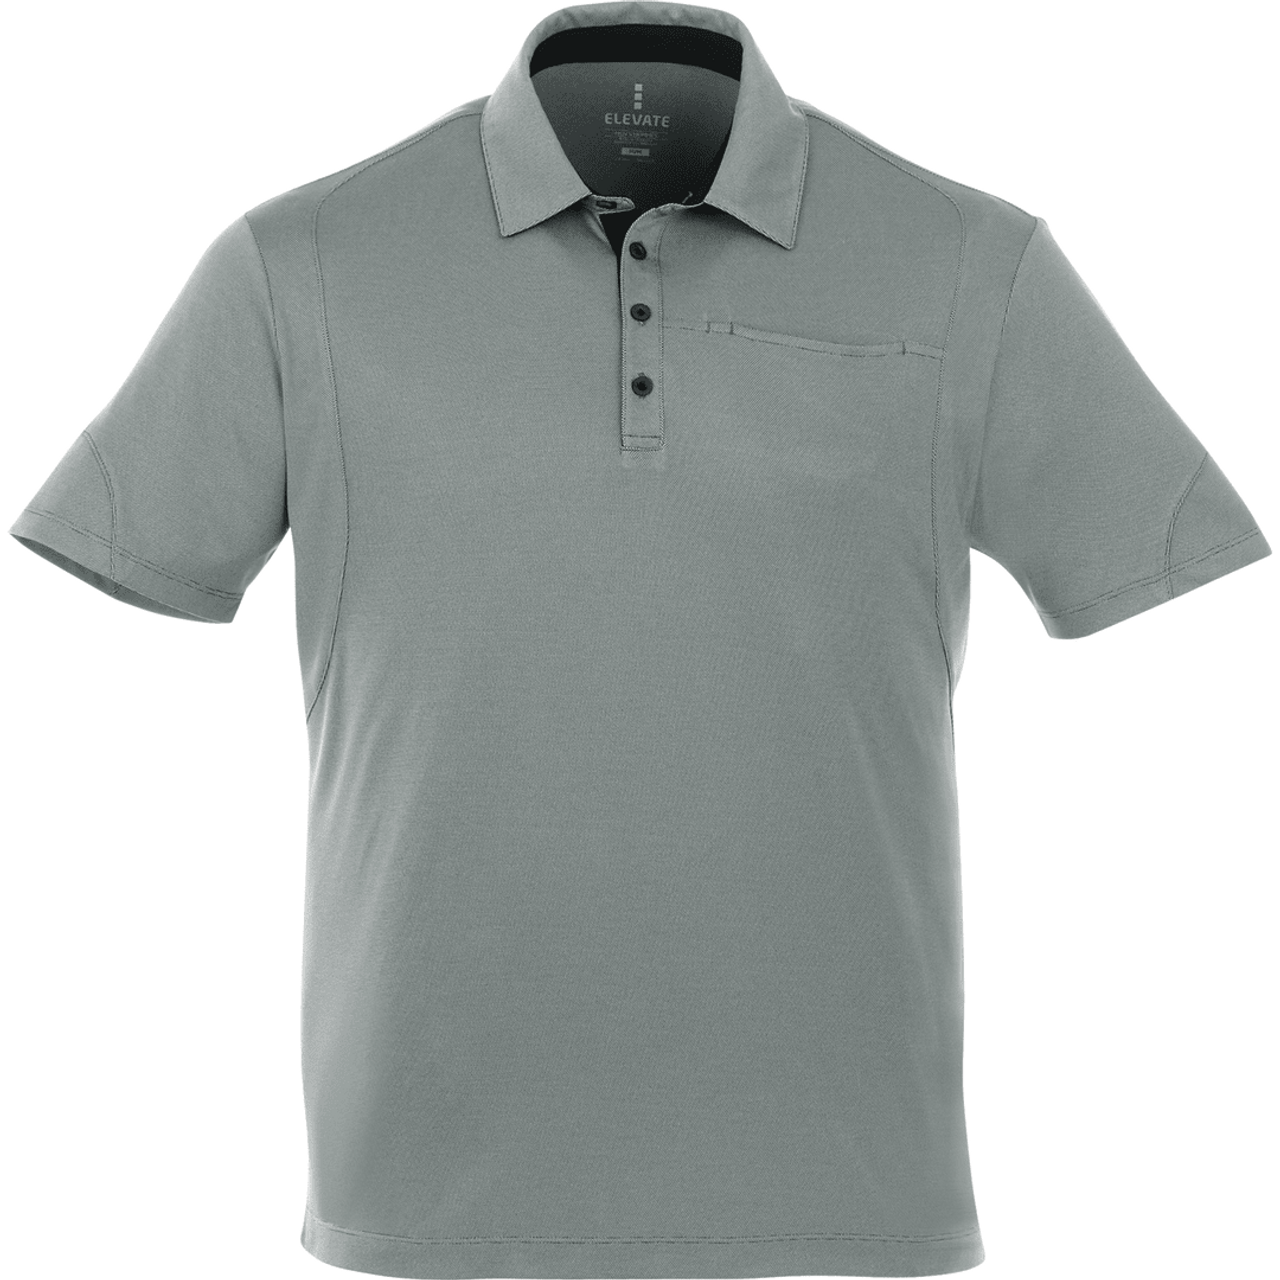 Embroidered Mens TORRES Short Sleeve Polo